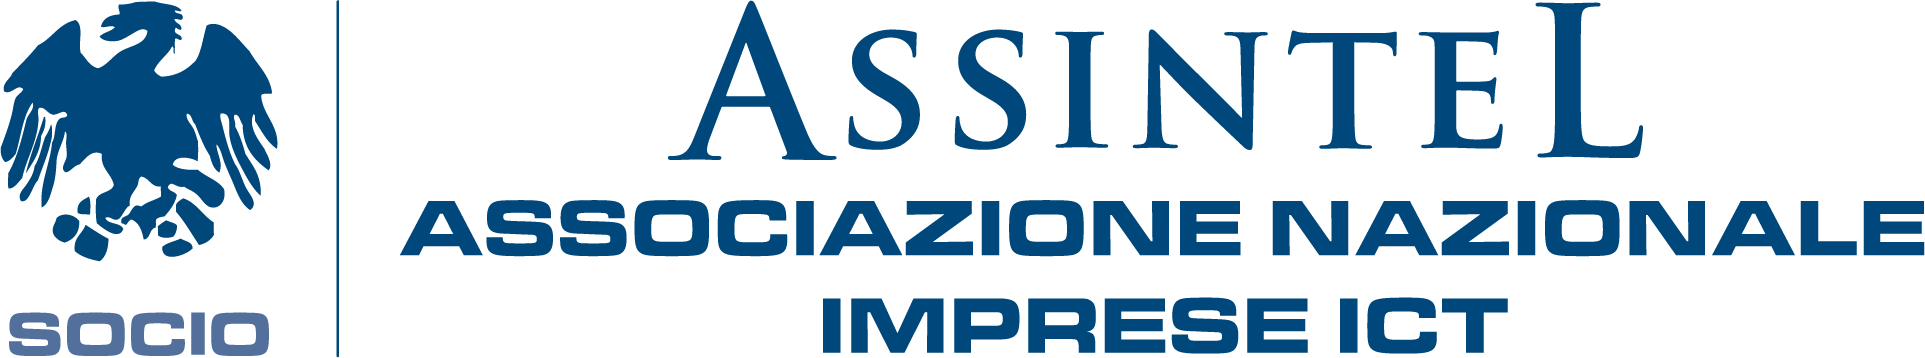 Simmat is a member of Assintel, the Italian National Association of ICT Companies. Assintel is a non-profit organization that represents and promotes the interests of ICT companies in Italy